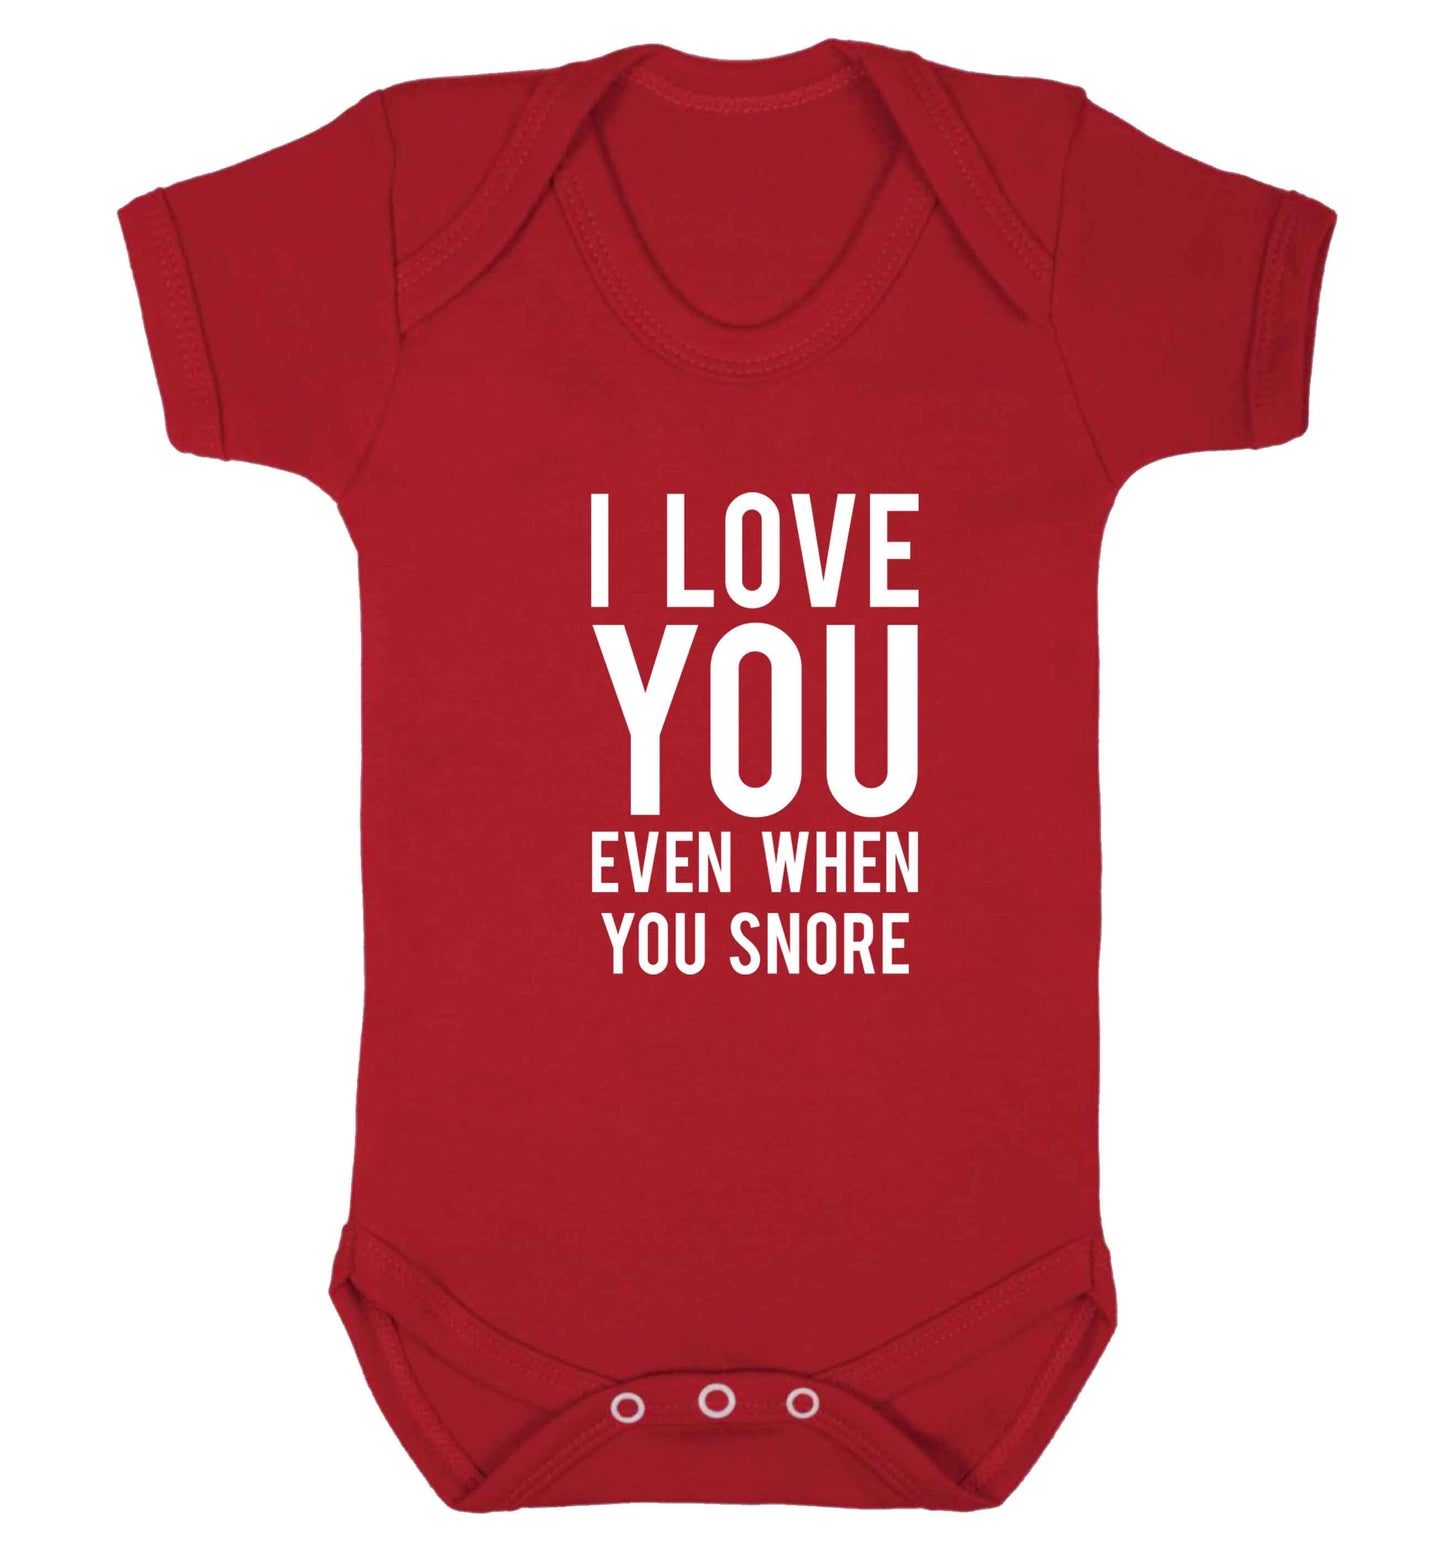 I love you even when you snore baby vest red 18-24 months